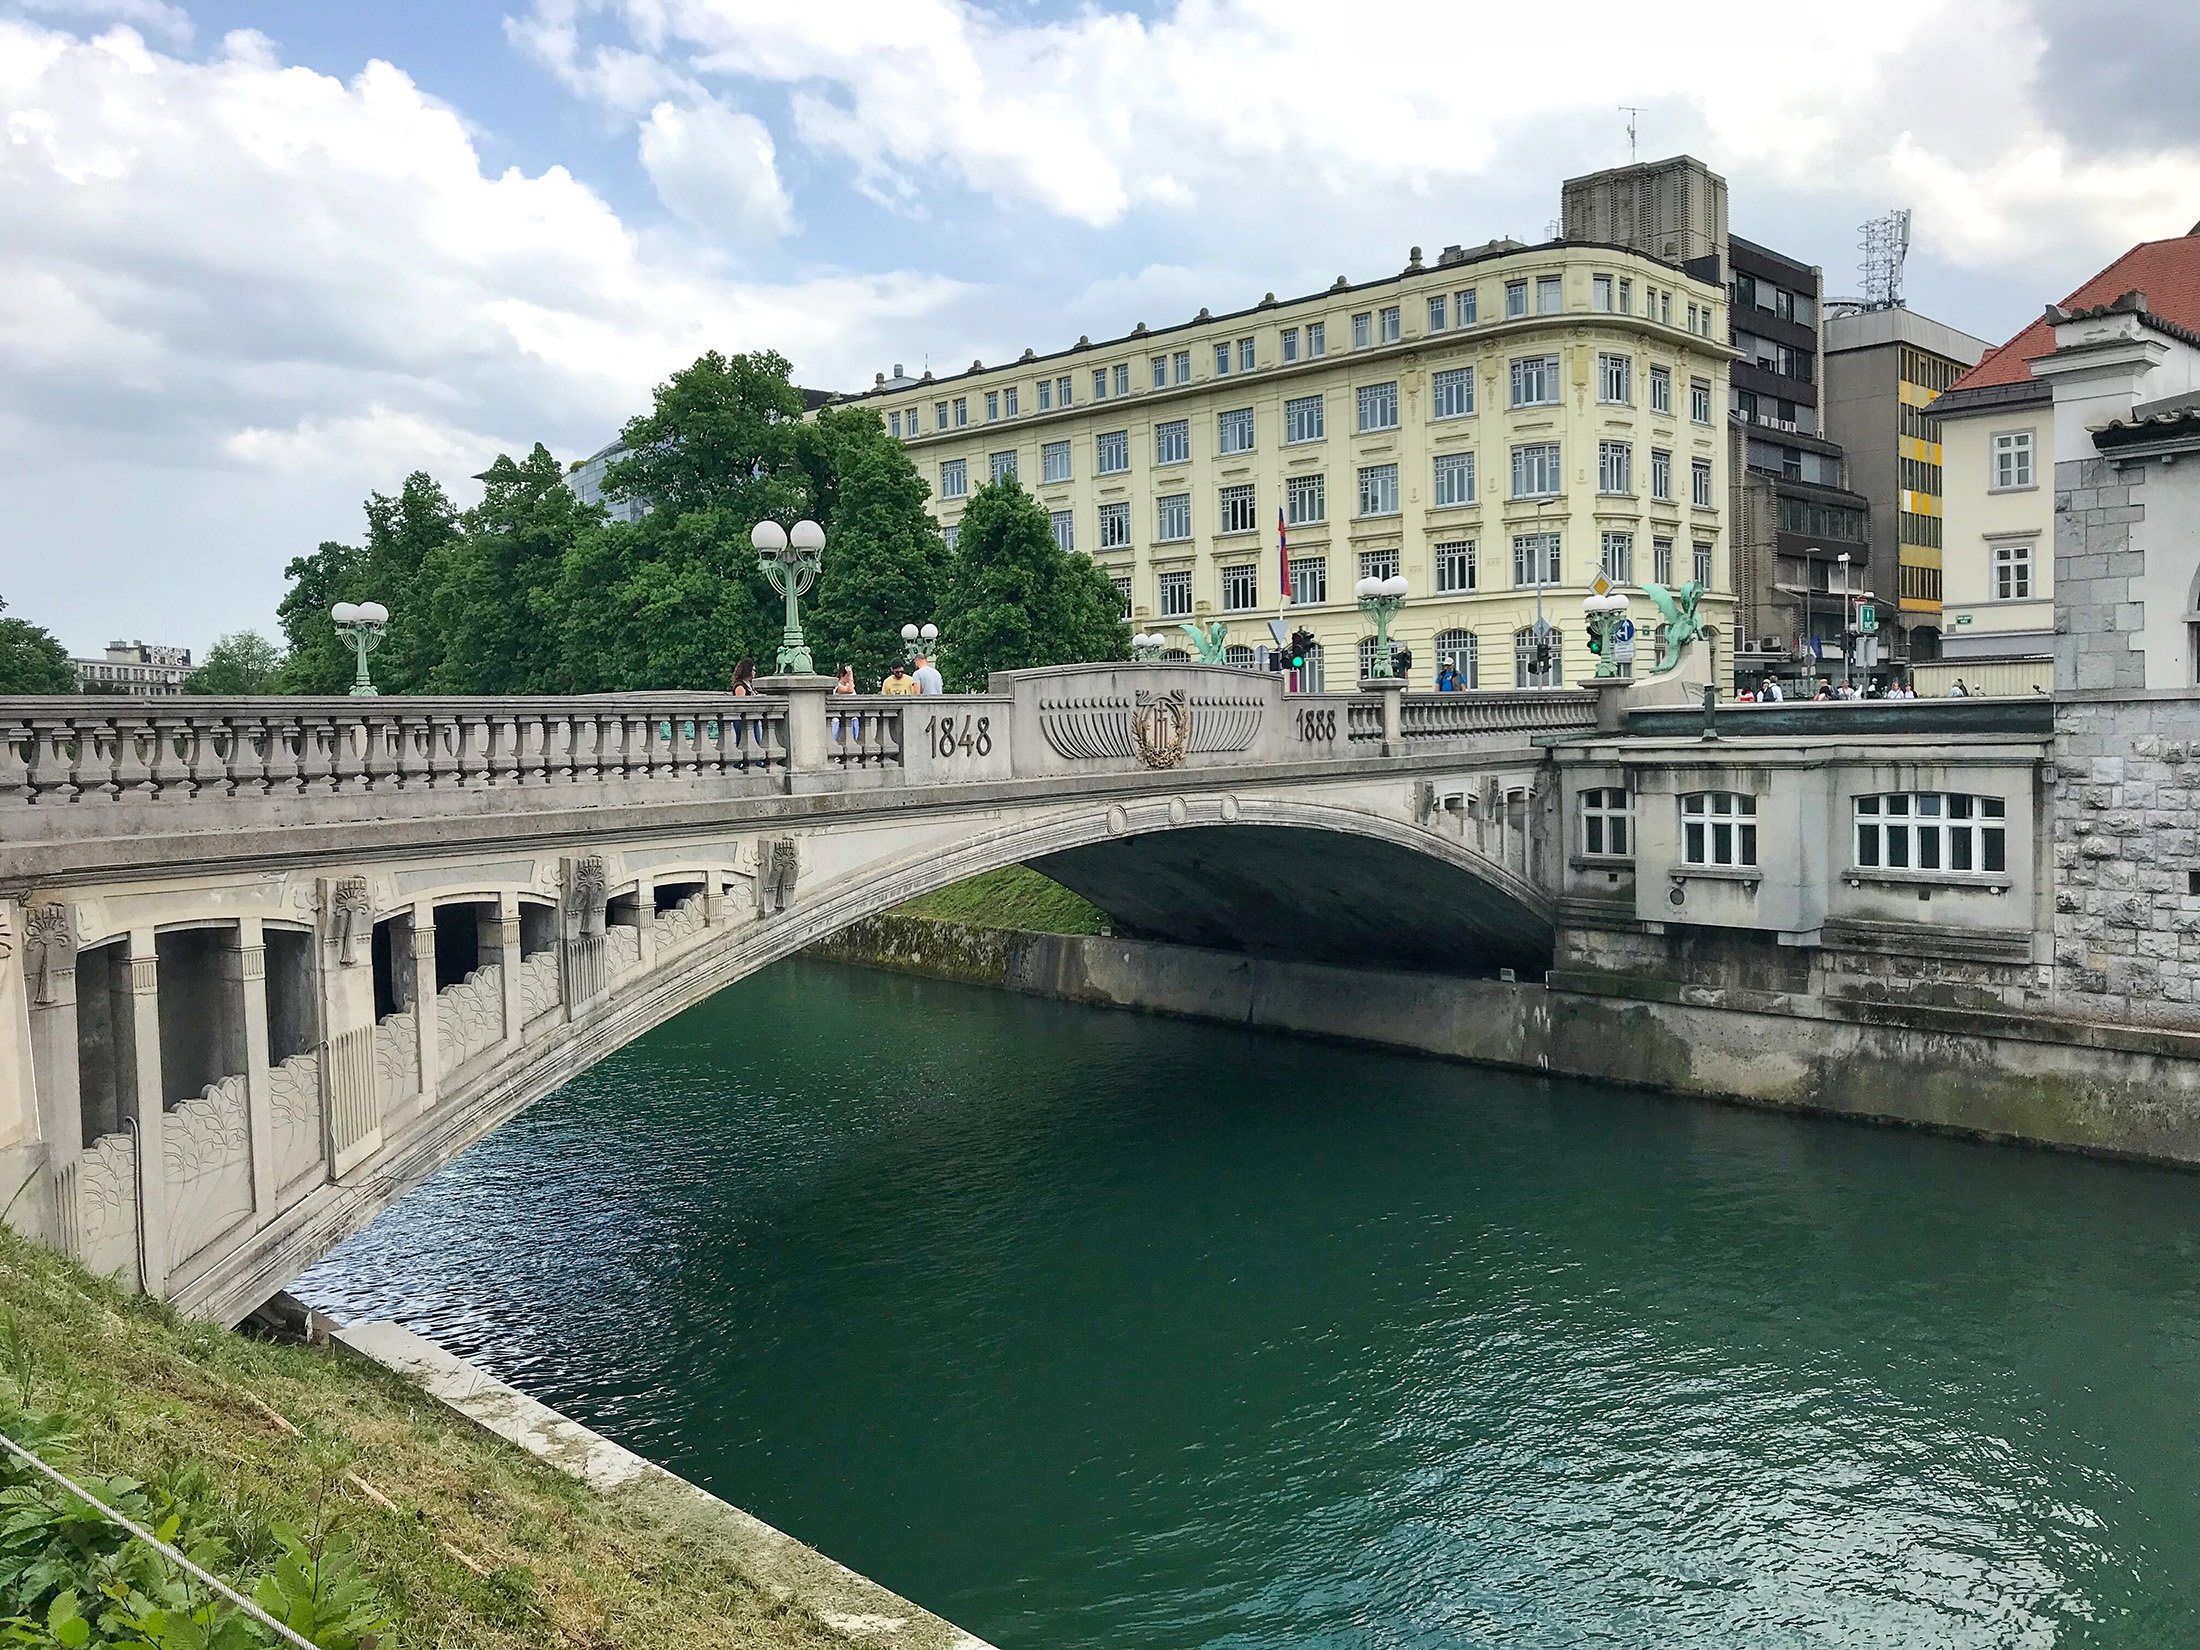 The Dragon Bridge connects the old and the new town of Ljubljana, Slovenia. (Photo by Özge Şengelen)